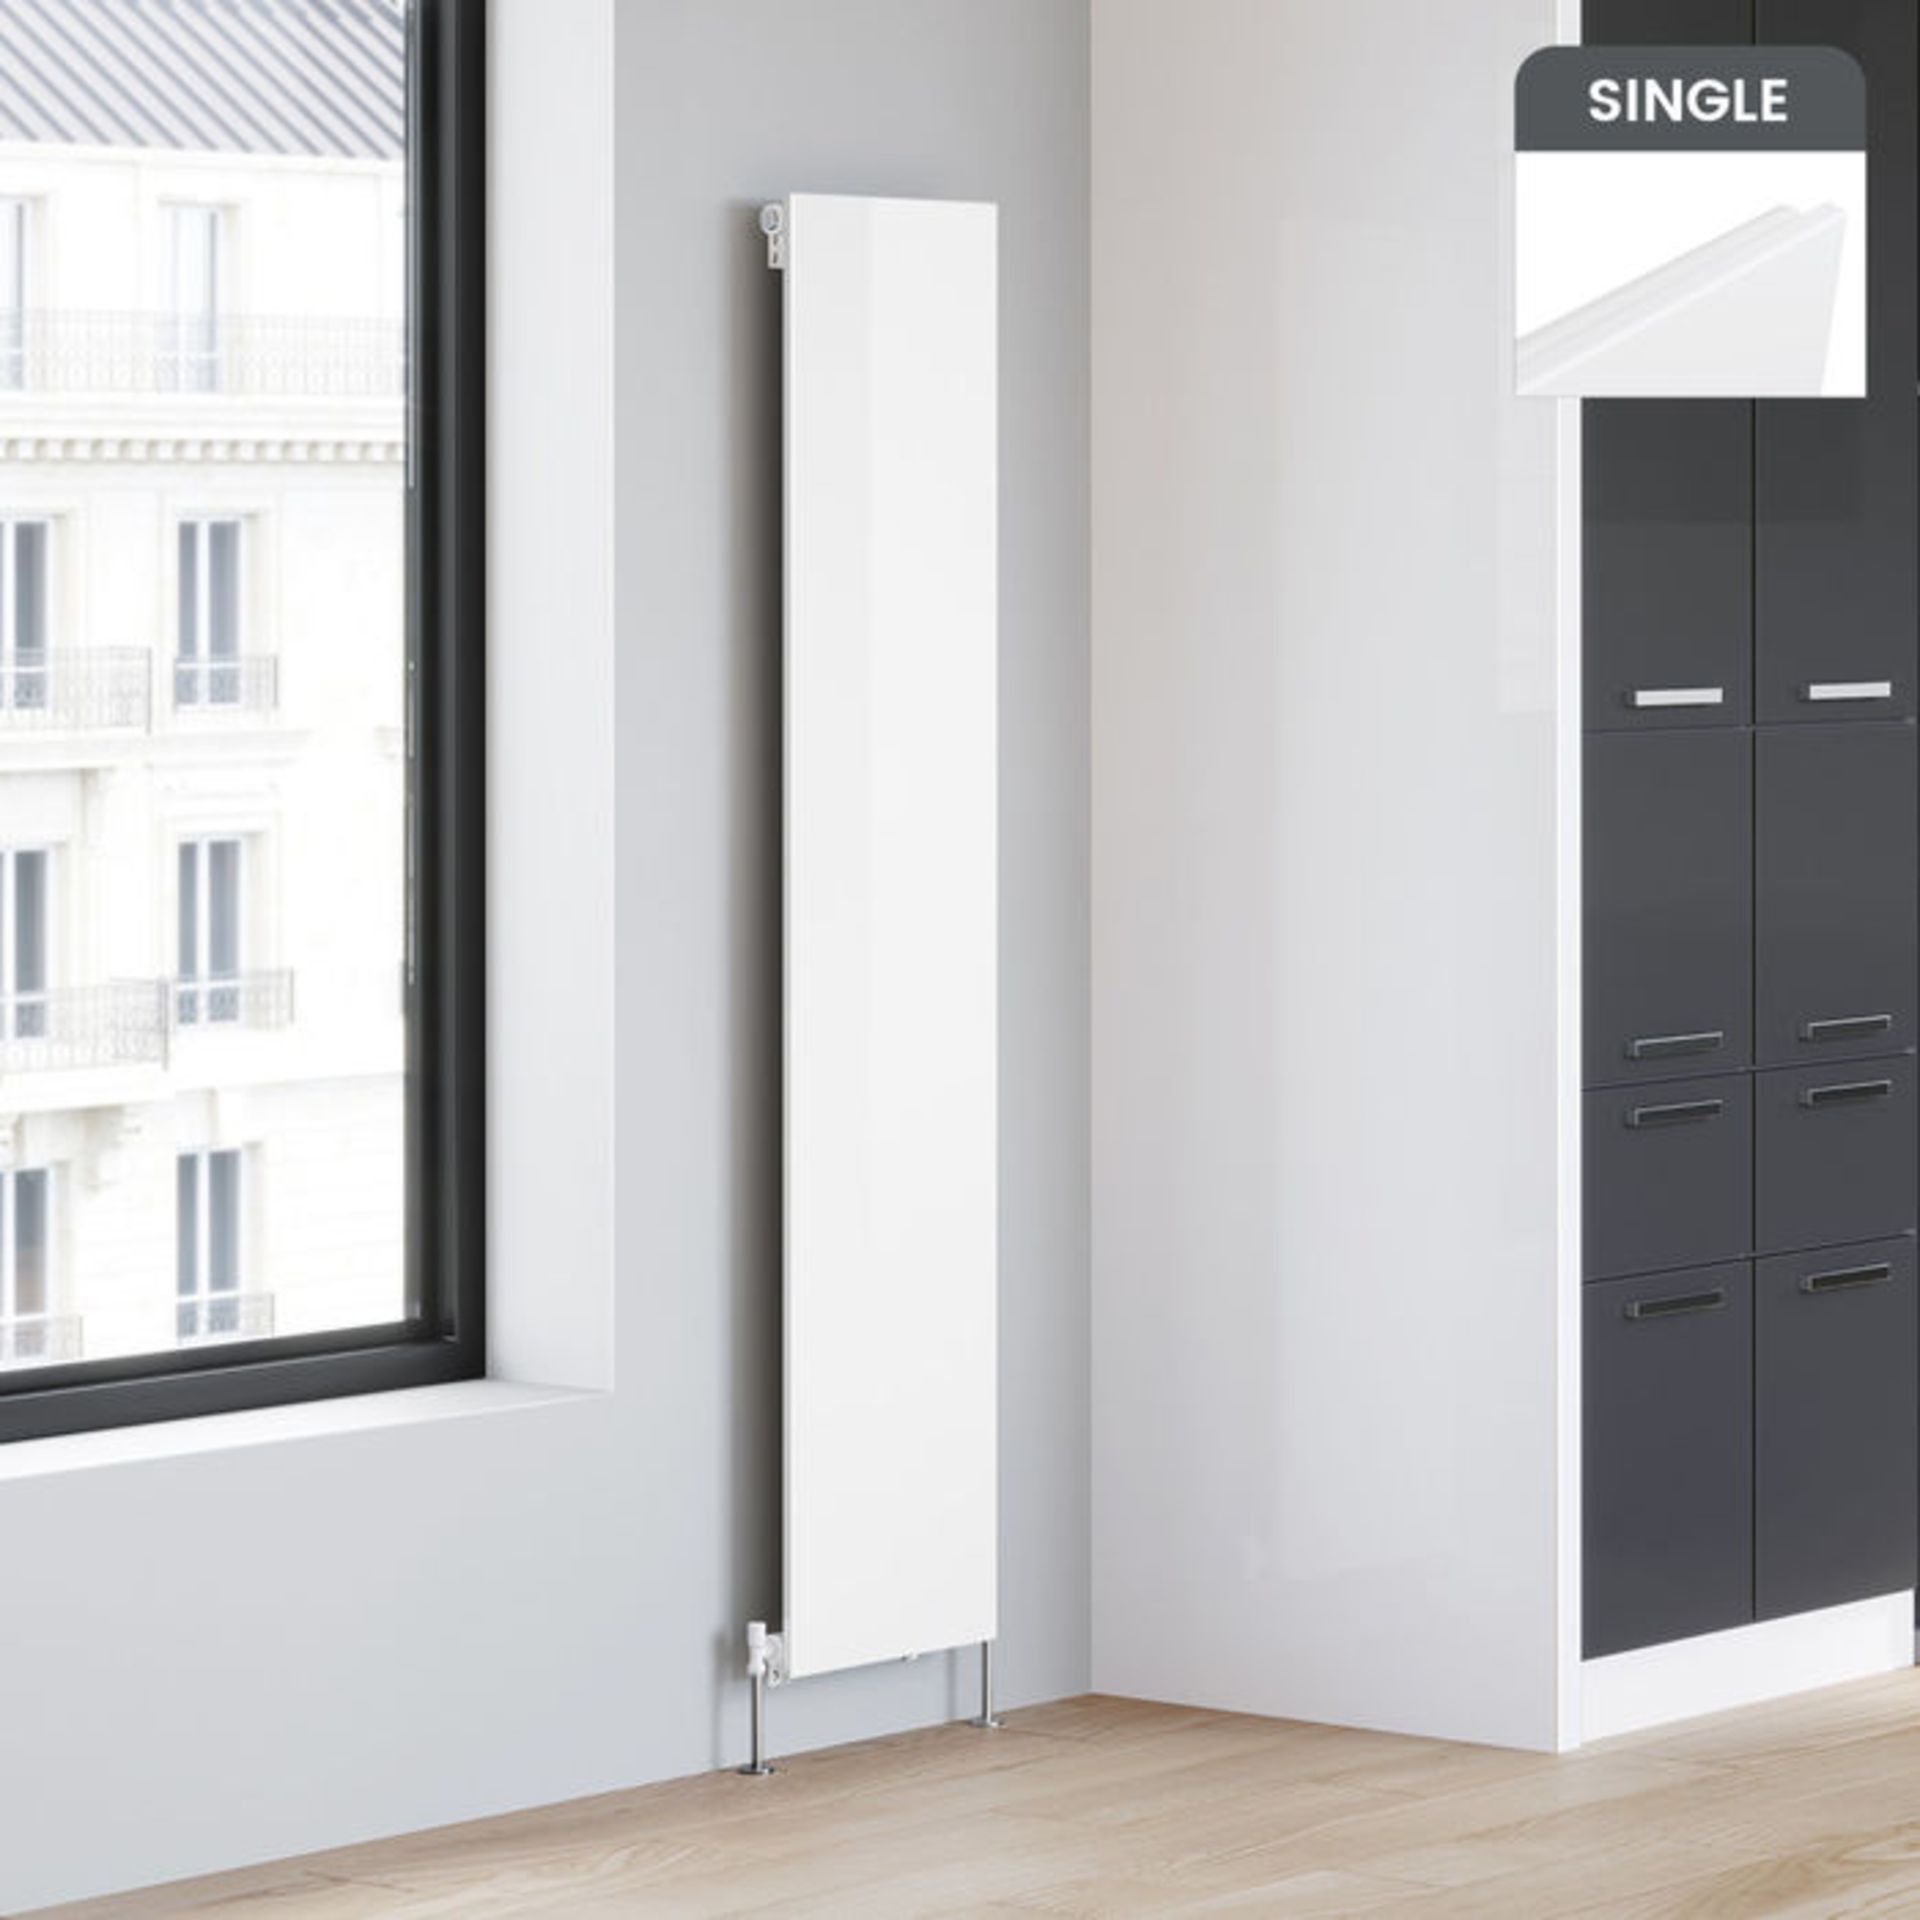 (AL10) 1800x380 Ultra Slim White Radiator. . Made from low carbon steel with a high quality white